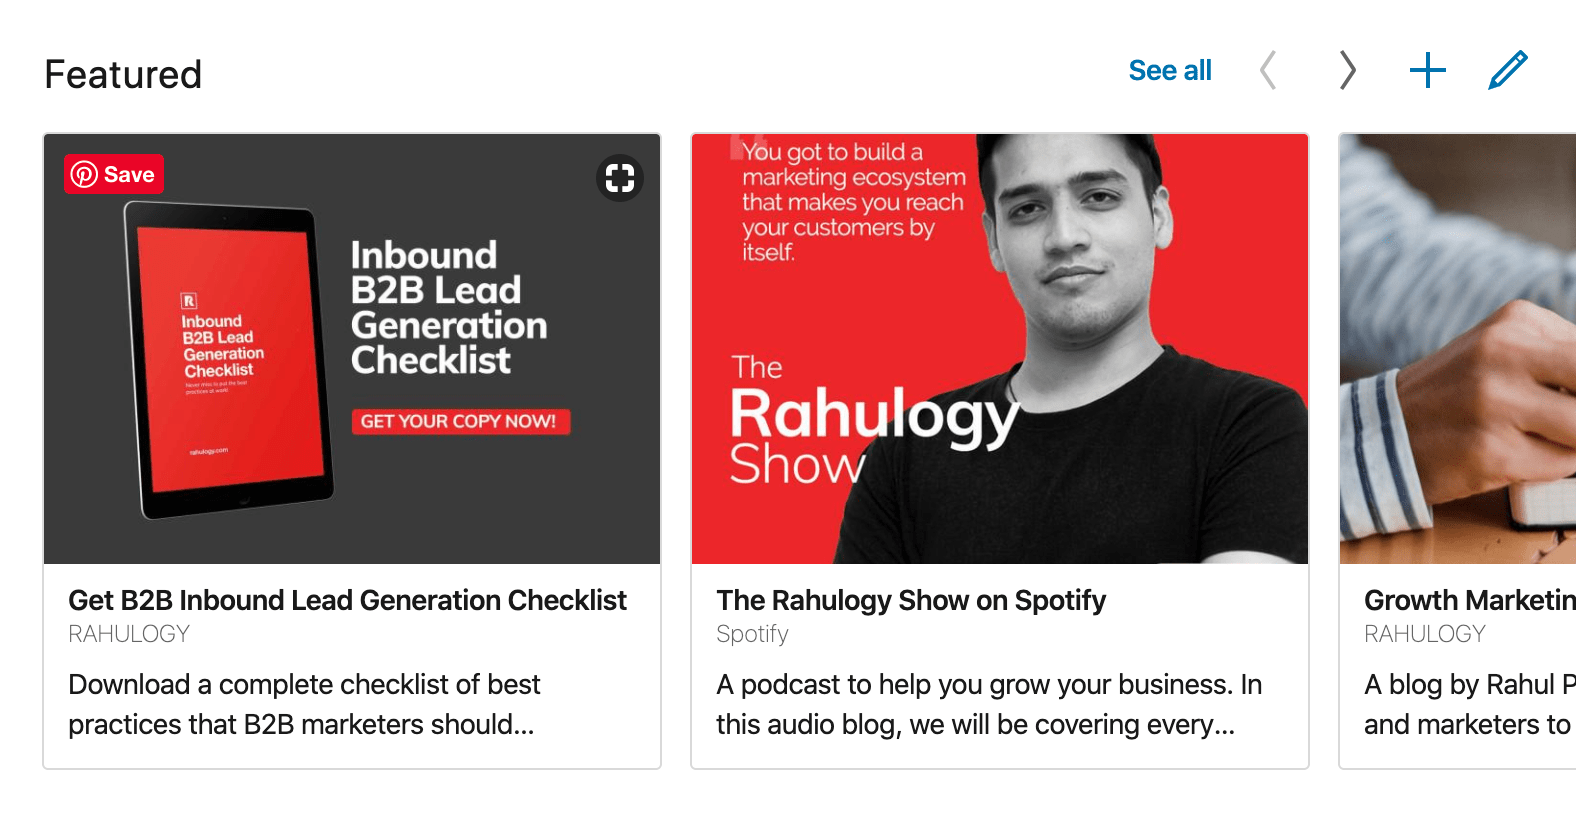 Featured section on LinkedIn